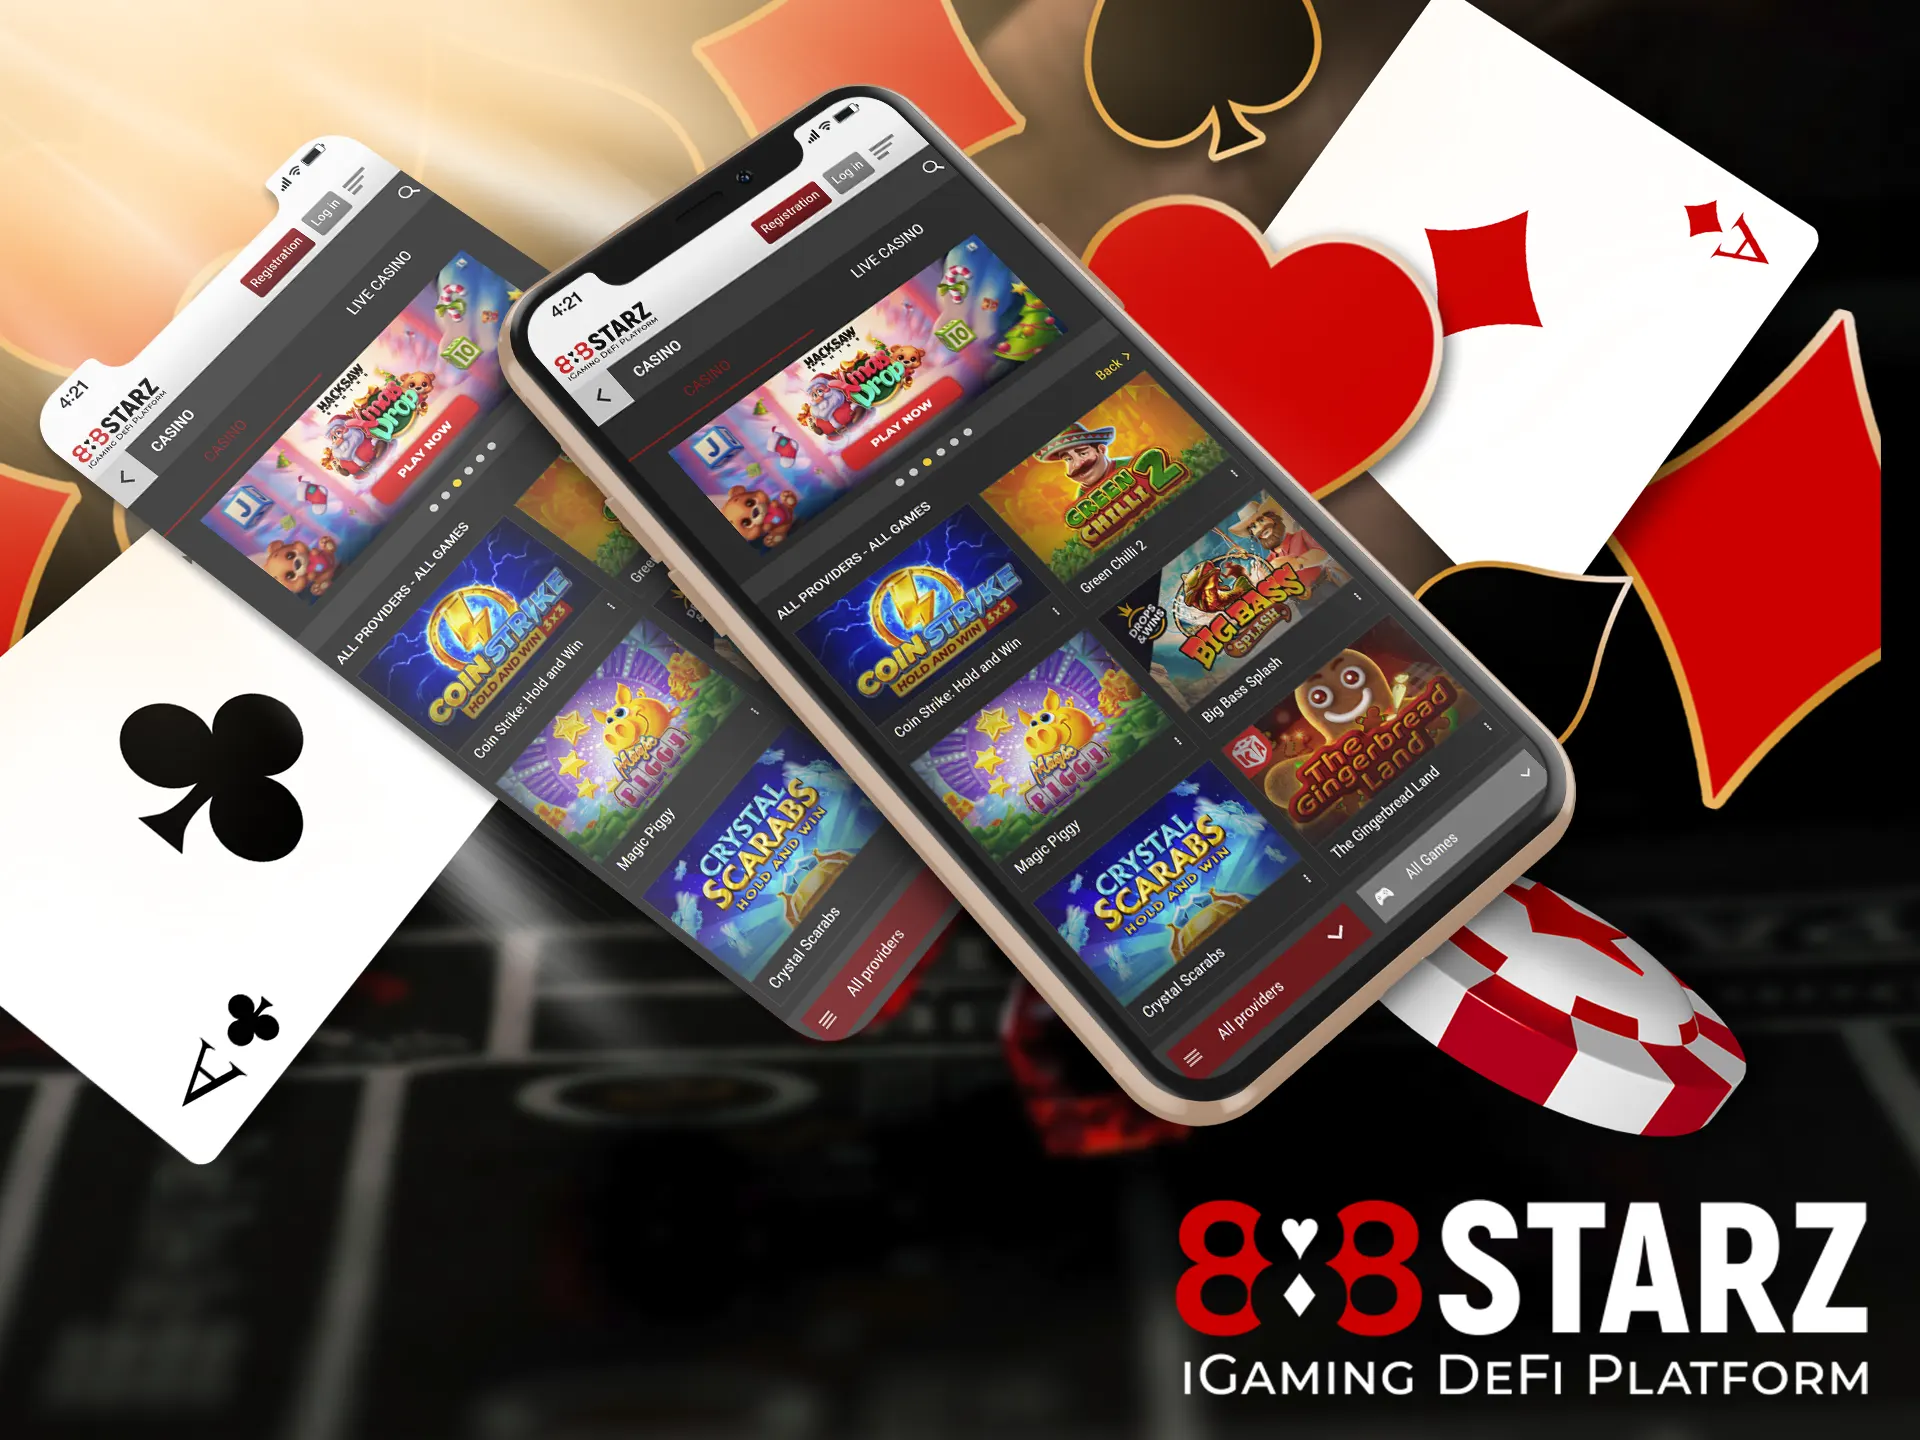 Get access to the gambling section after installing the 1888starz app on your smartphone.